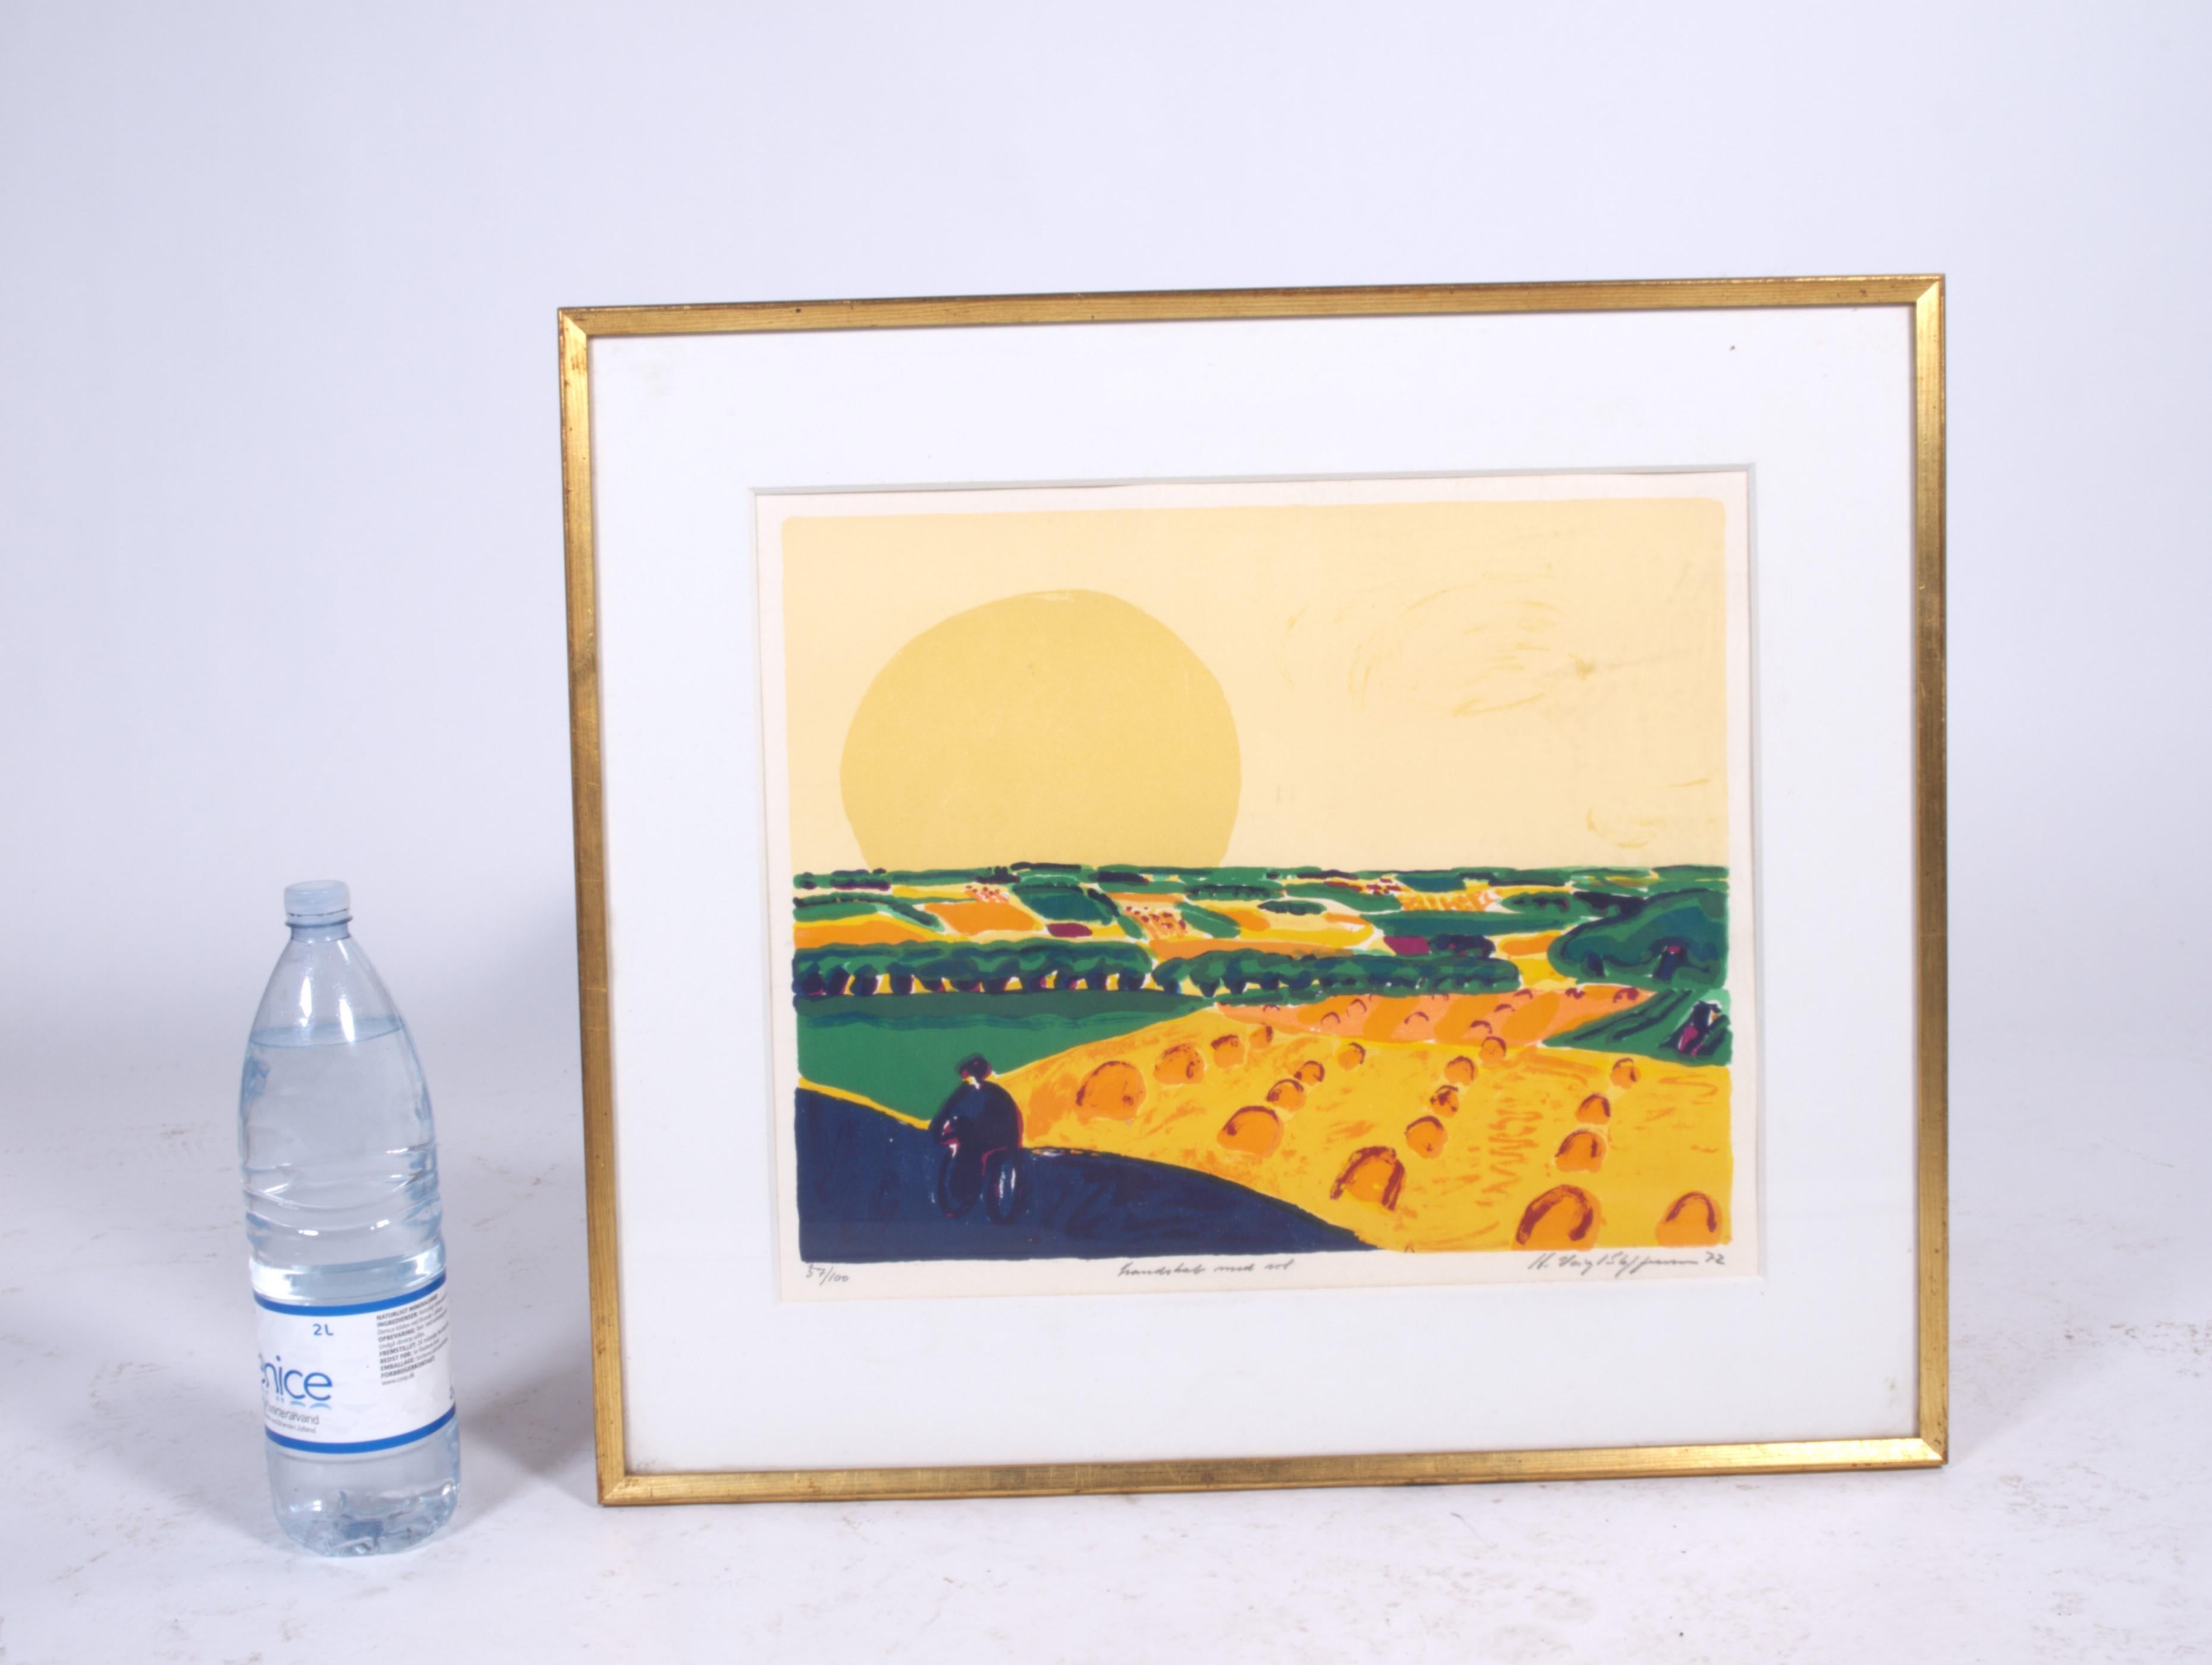 Presenting a beautiful lithograph by Hans Voigt Steffensen from 1977, encased in a gold-framed passepartout in very good condition.

The lithograph shows some signs of wear, as can be seen in the pictures (there is a little 